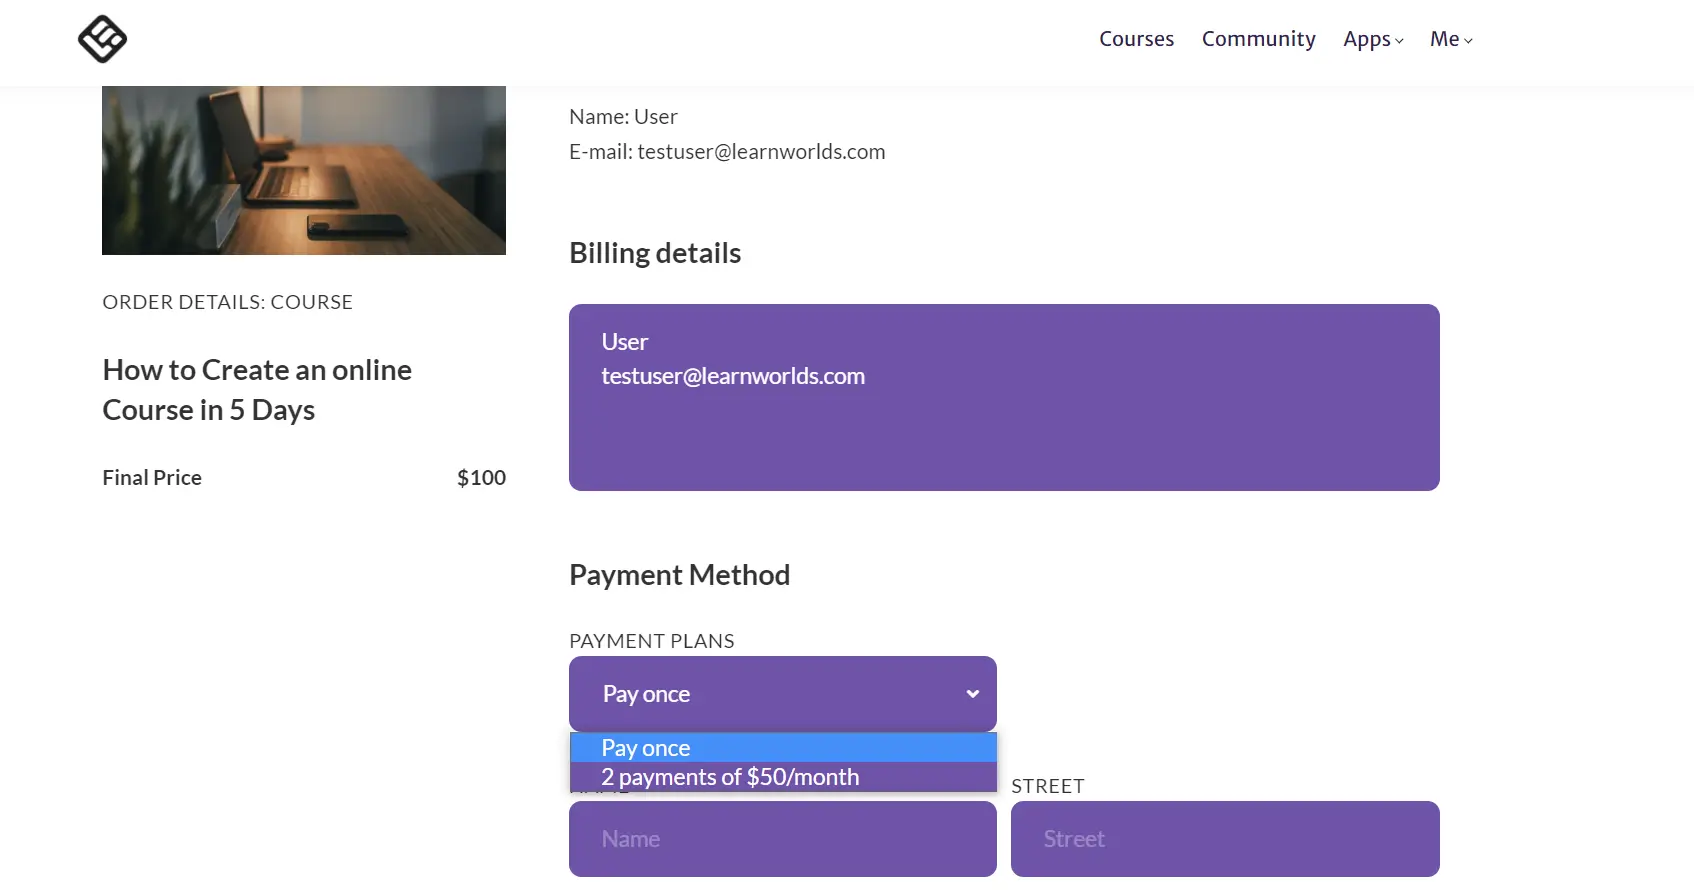 Payment plan form on LearnWorlds, showing a drop down menu for payments.